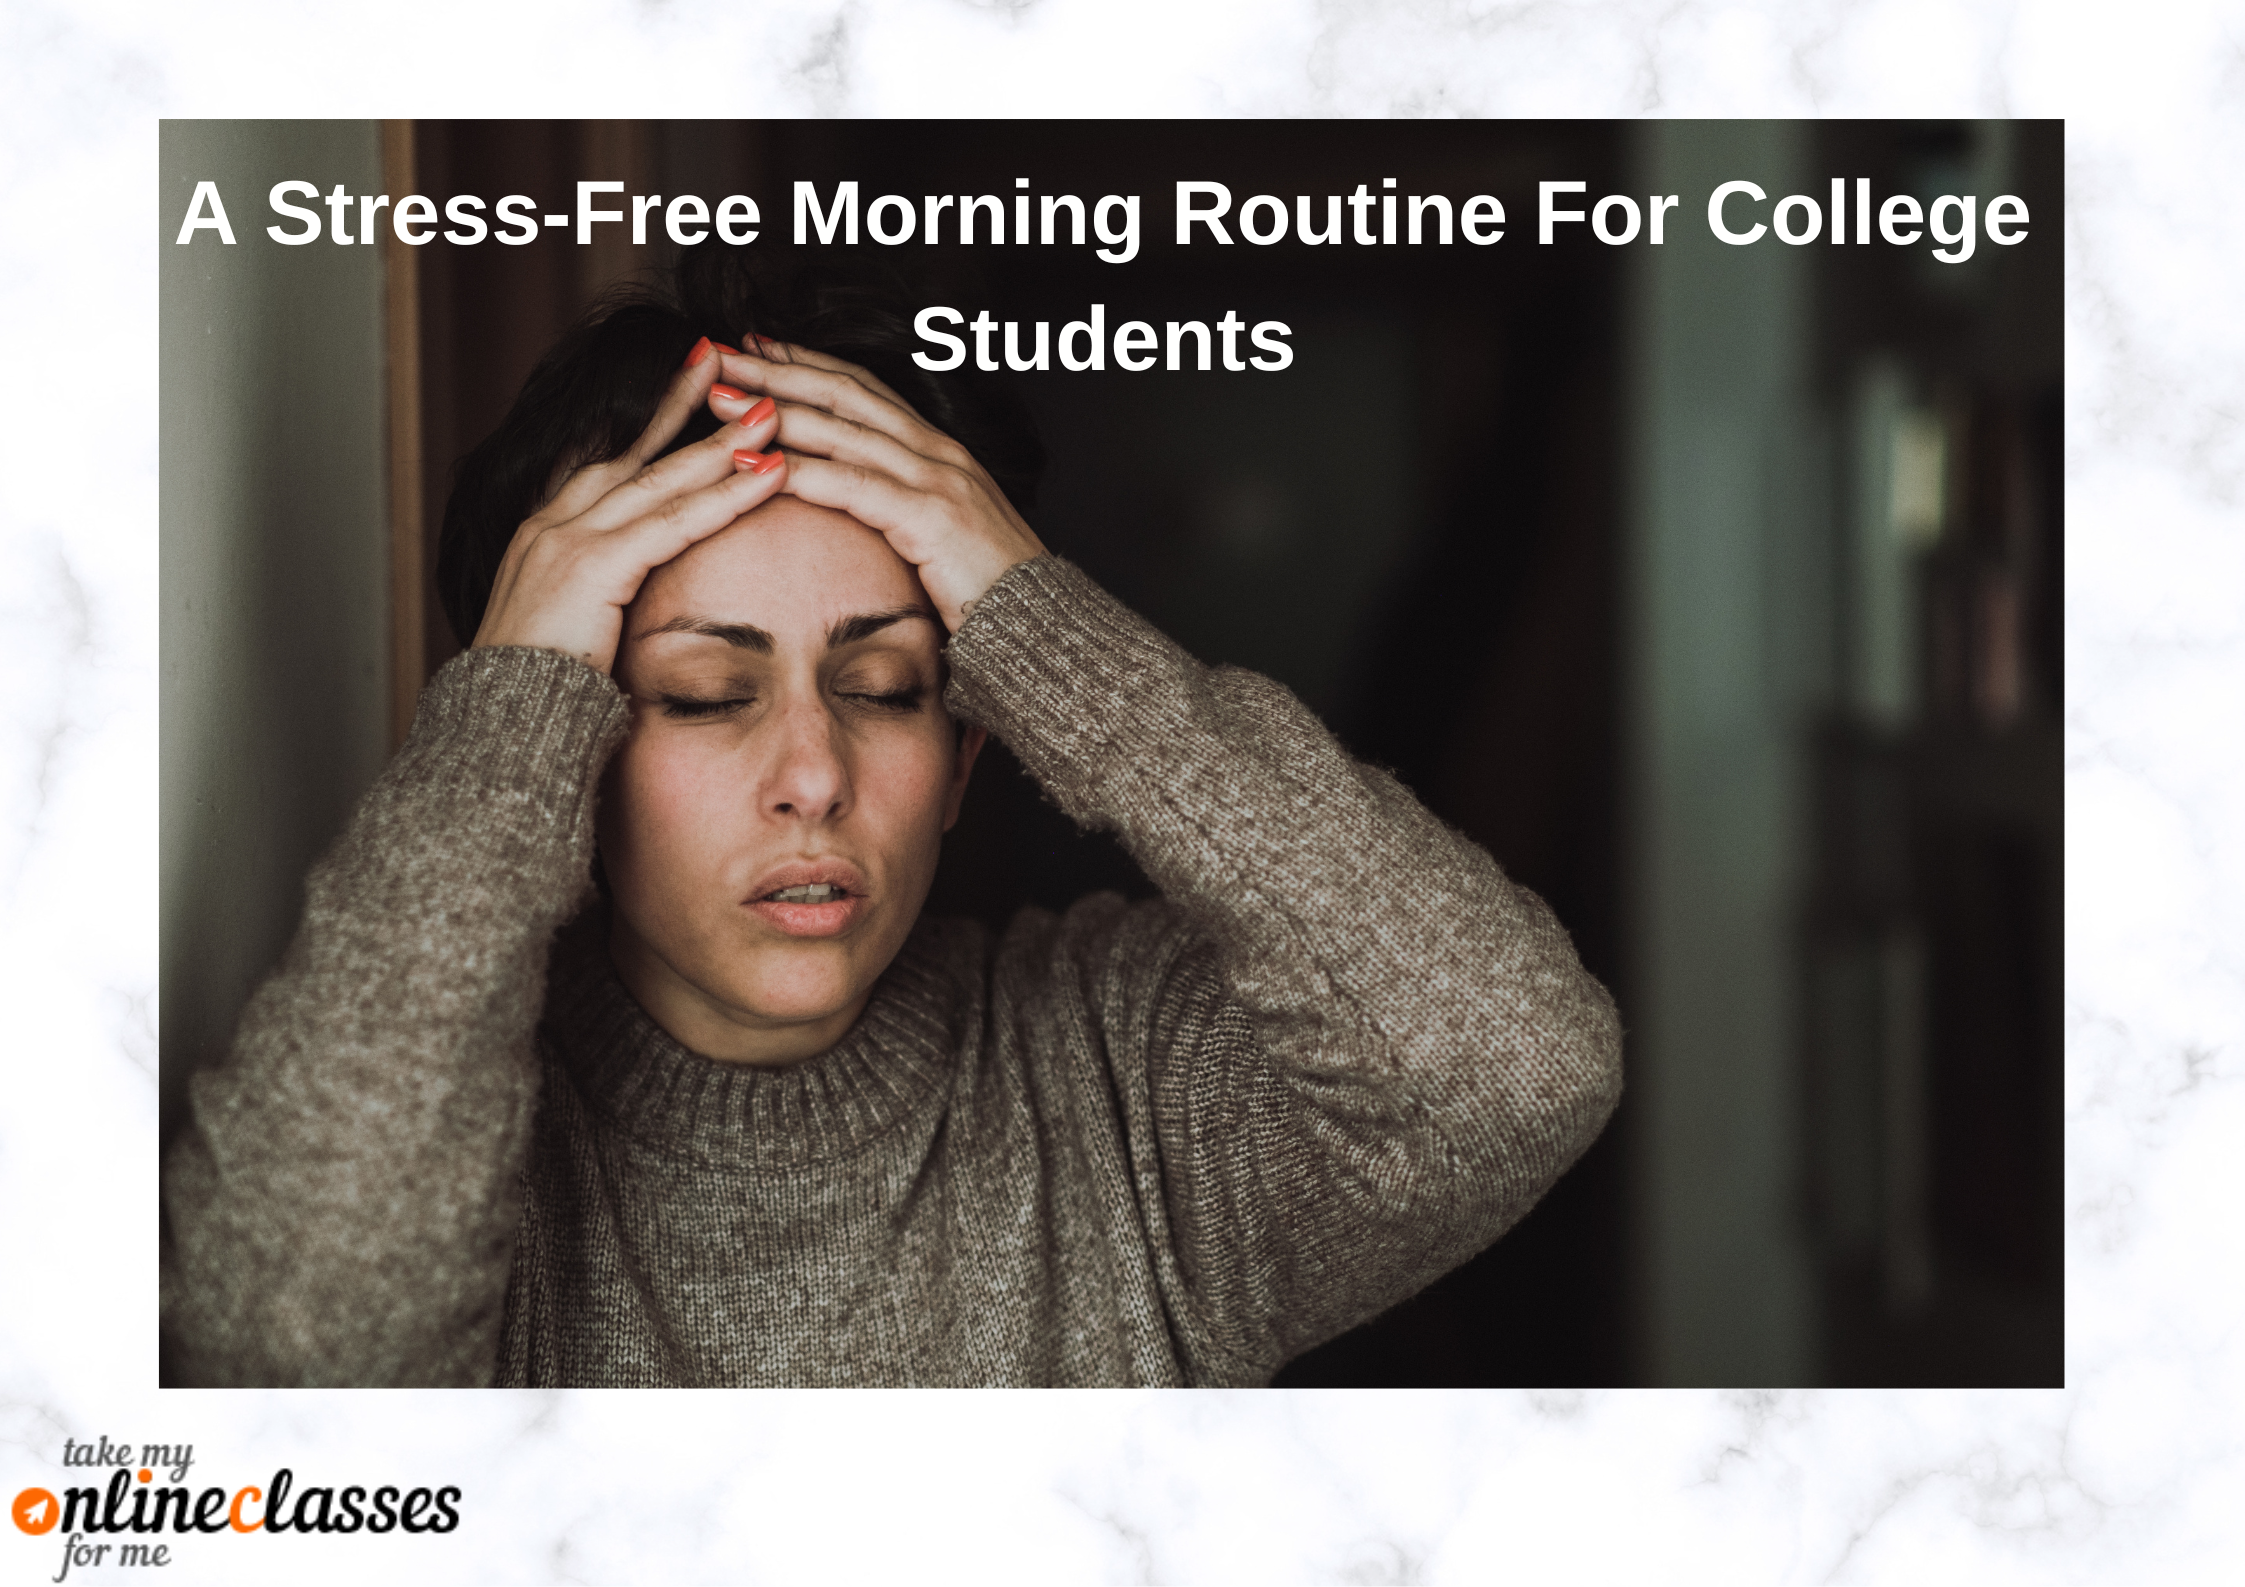 A Stress-Free Morning Routine For College Students